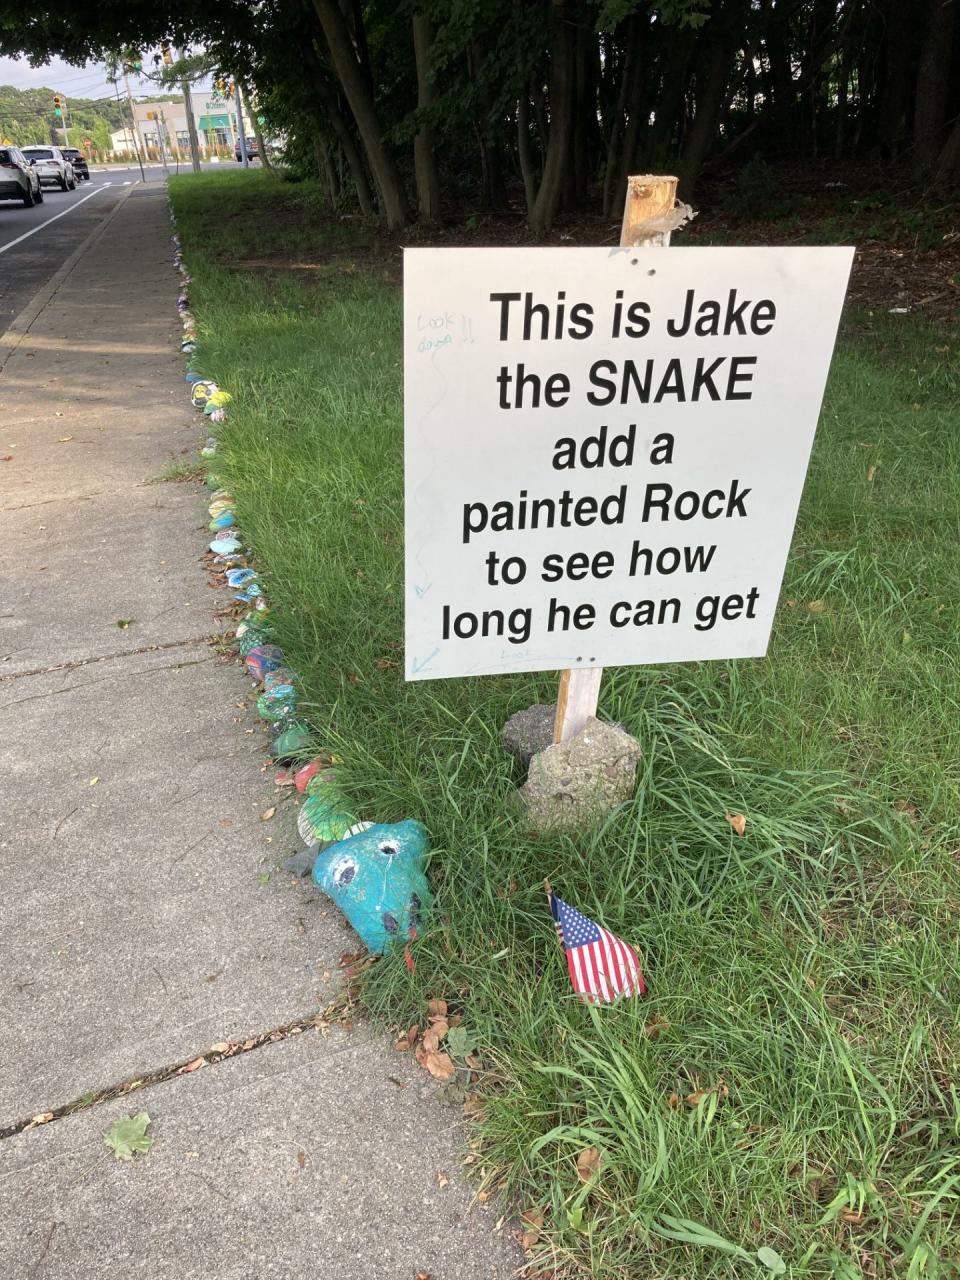 Jake the Snake has become a popular attraction in Warwick, with hundreds of rocks adding steadily to its length.